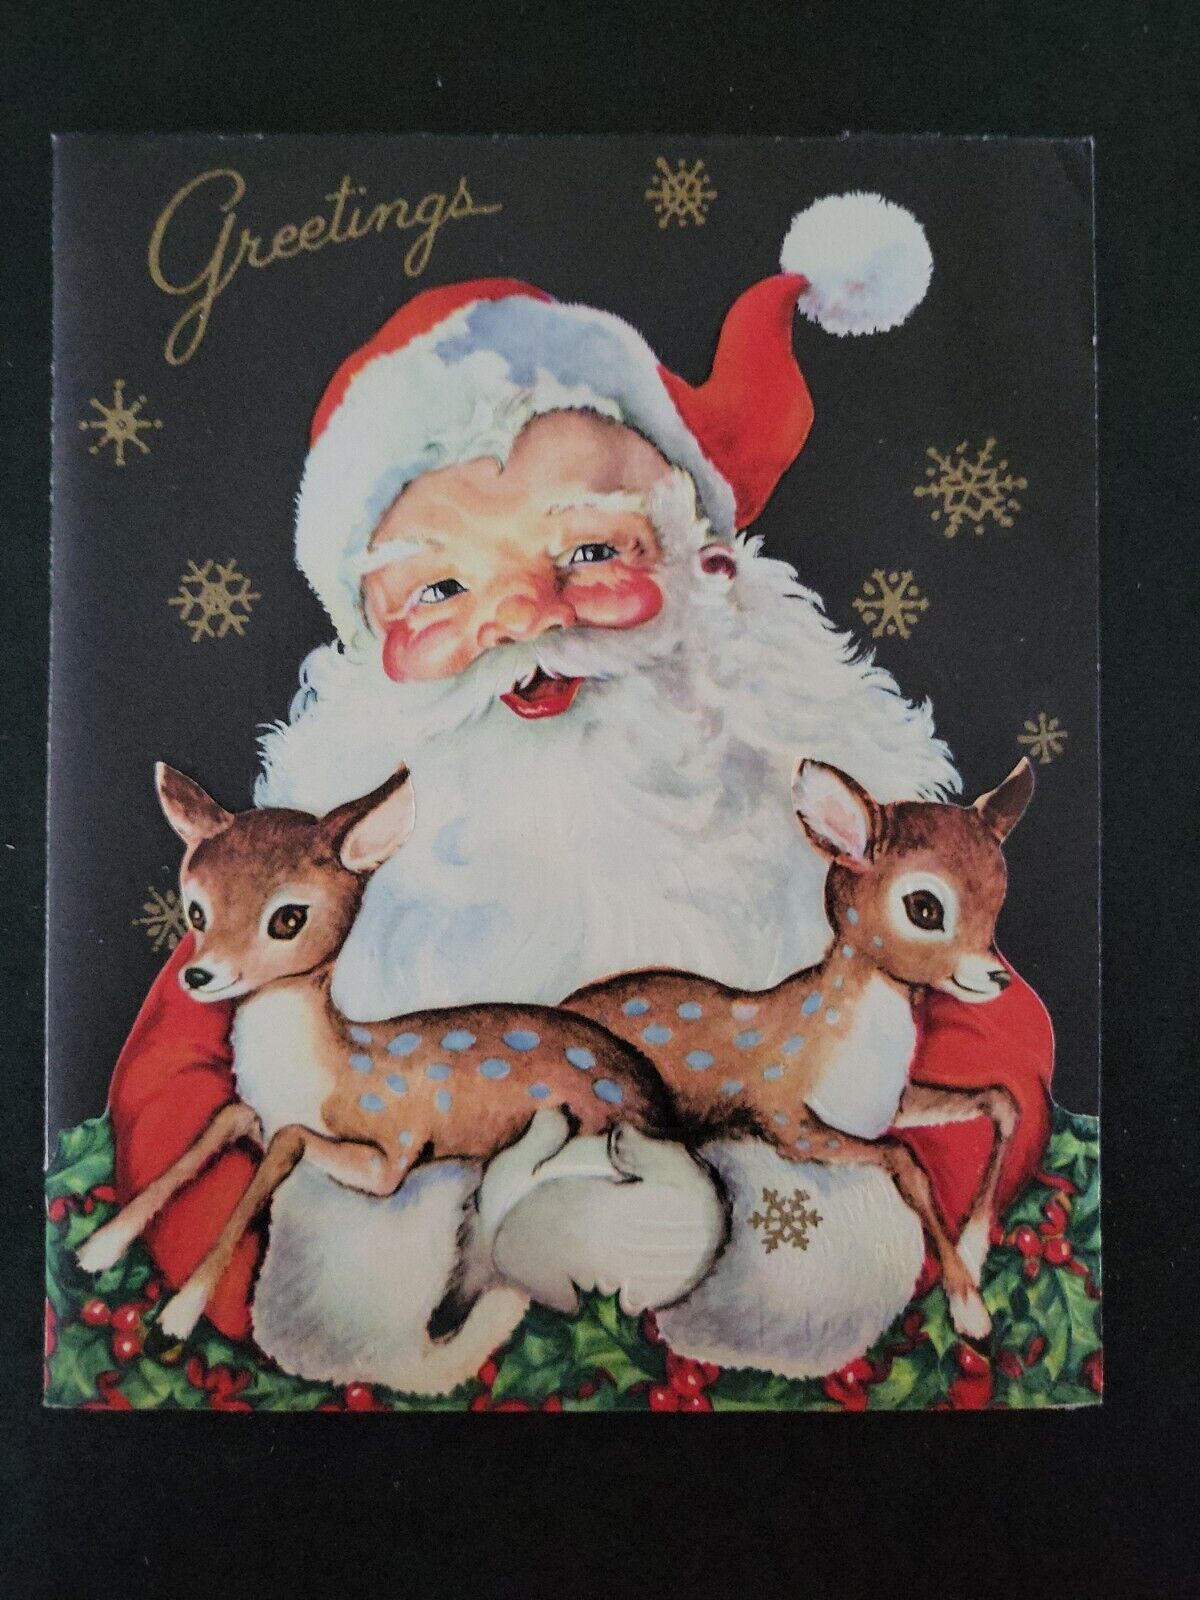 Vtg Christmas Greeting Card Santa Claus Holding two Deer Fawns Snowflakes holly